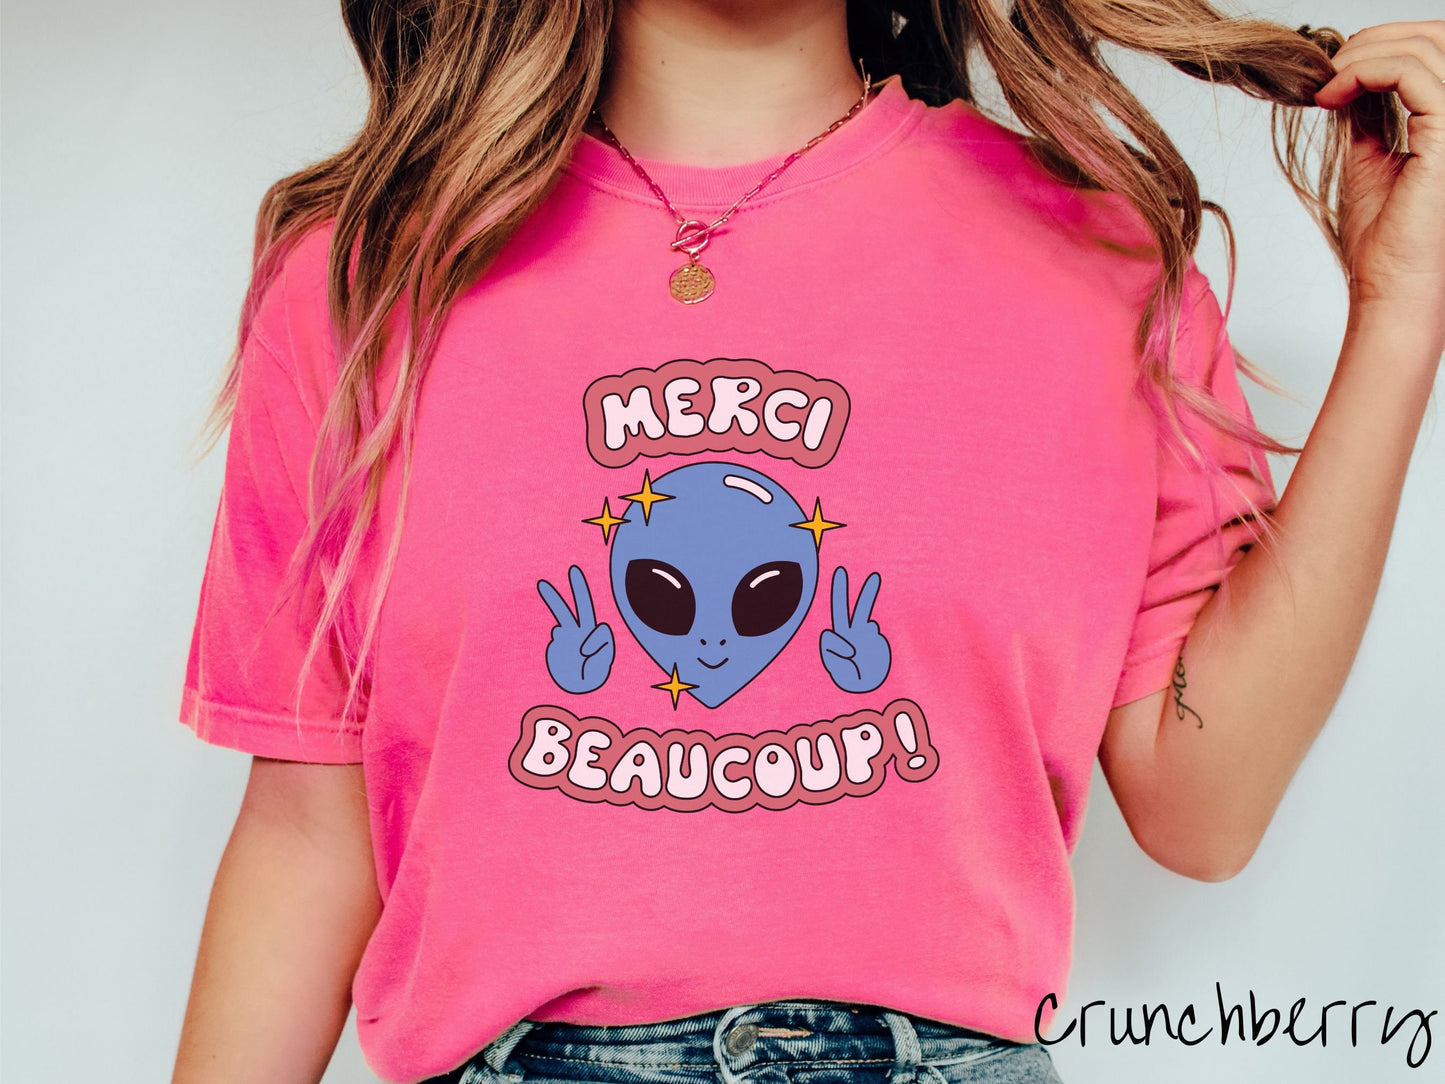 A woman wearing a cute, vintage crunchberry colored Comfort Colors shirt with the text Merci Beaucoup! in white and maroon colored font. In between that is a blue alien with large black eyes smiling and holding up two peace signs.